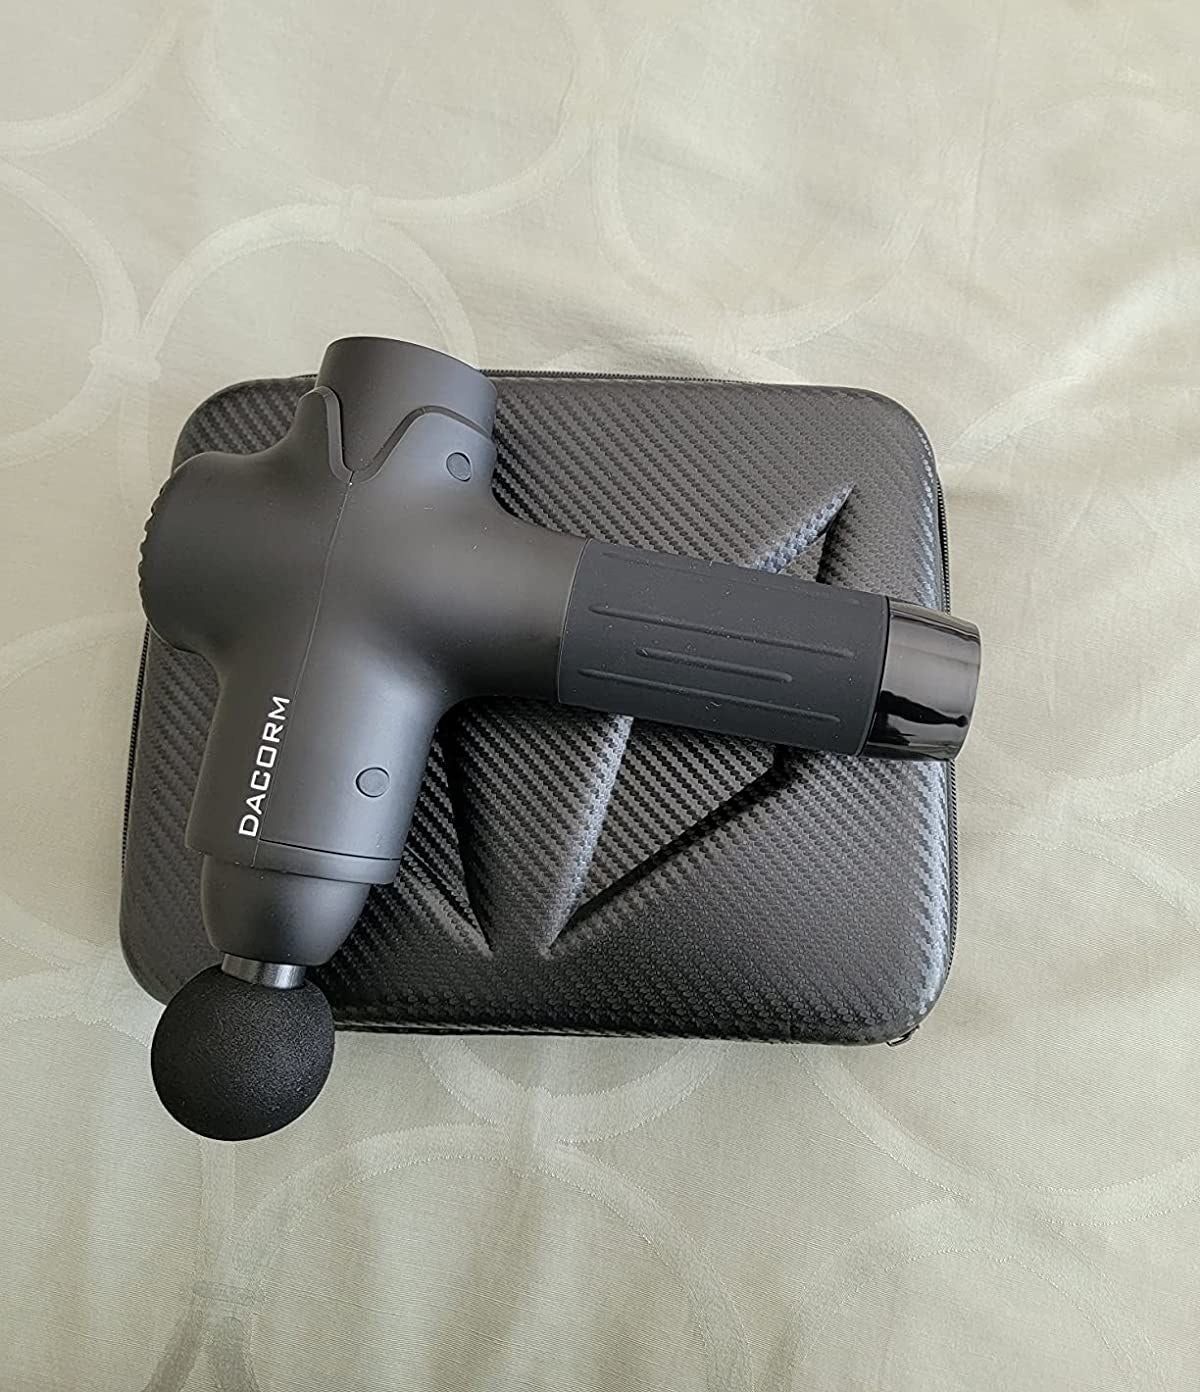 reviewer image of the massage gun on top of its case